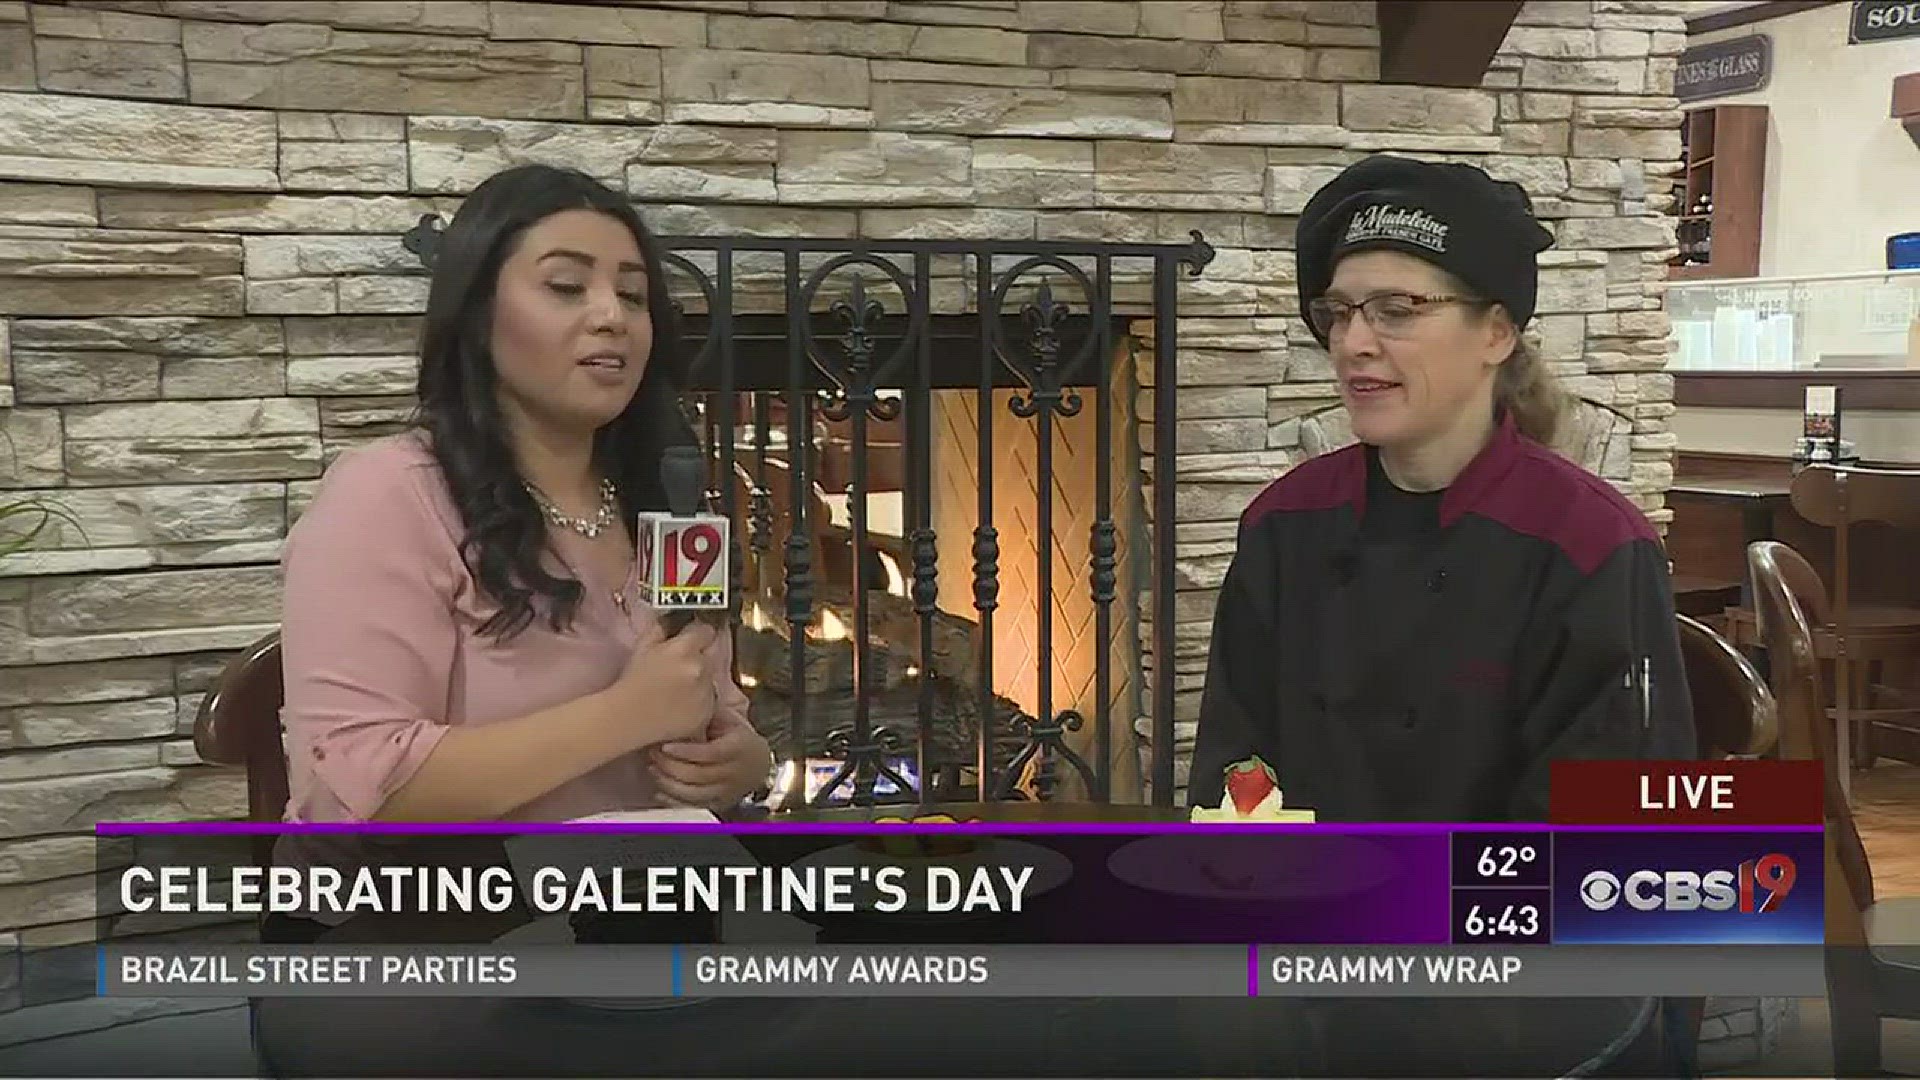 Galentine's Day is observed the day before Valentine's Day.